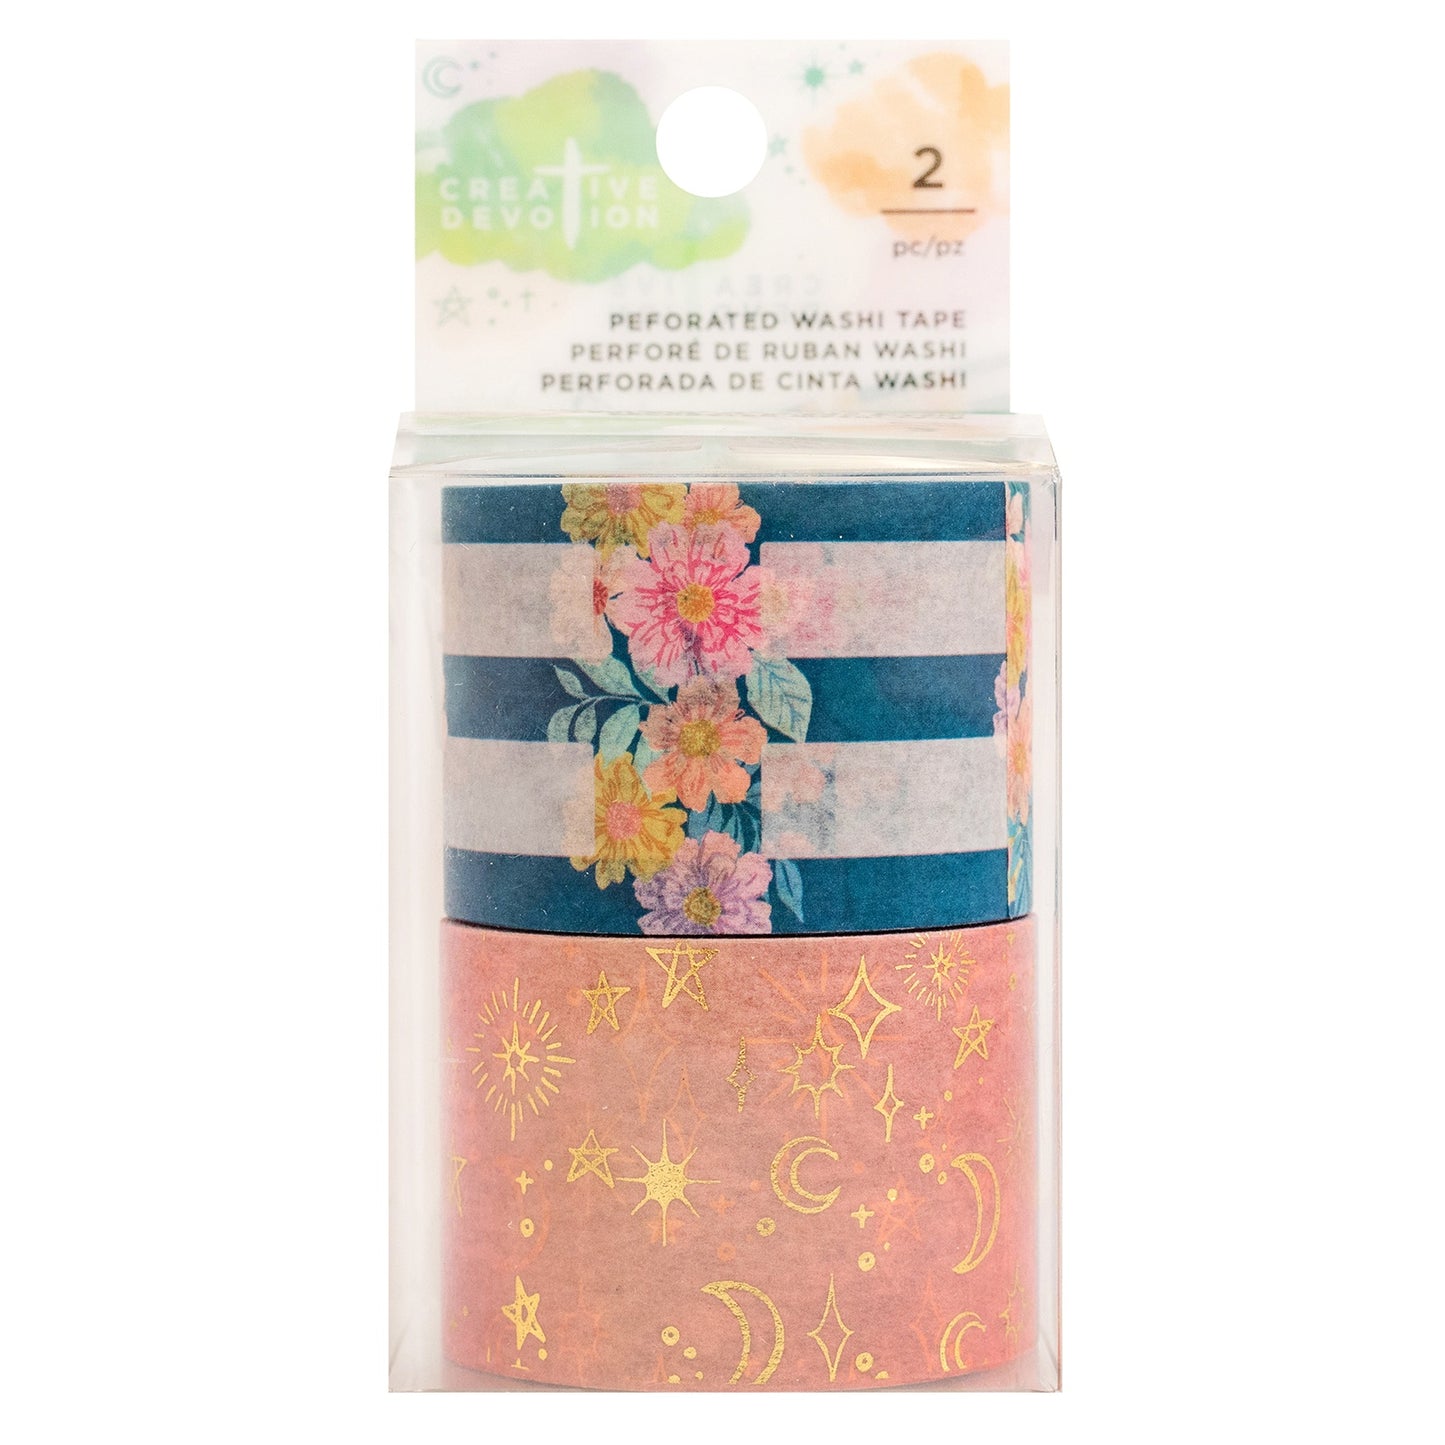 Creative Devotion Draw Near Washi Tape 2/Pkg-Perforated Tab, W/Matte Gold Foil Accent